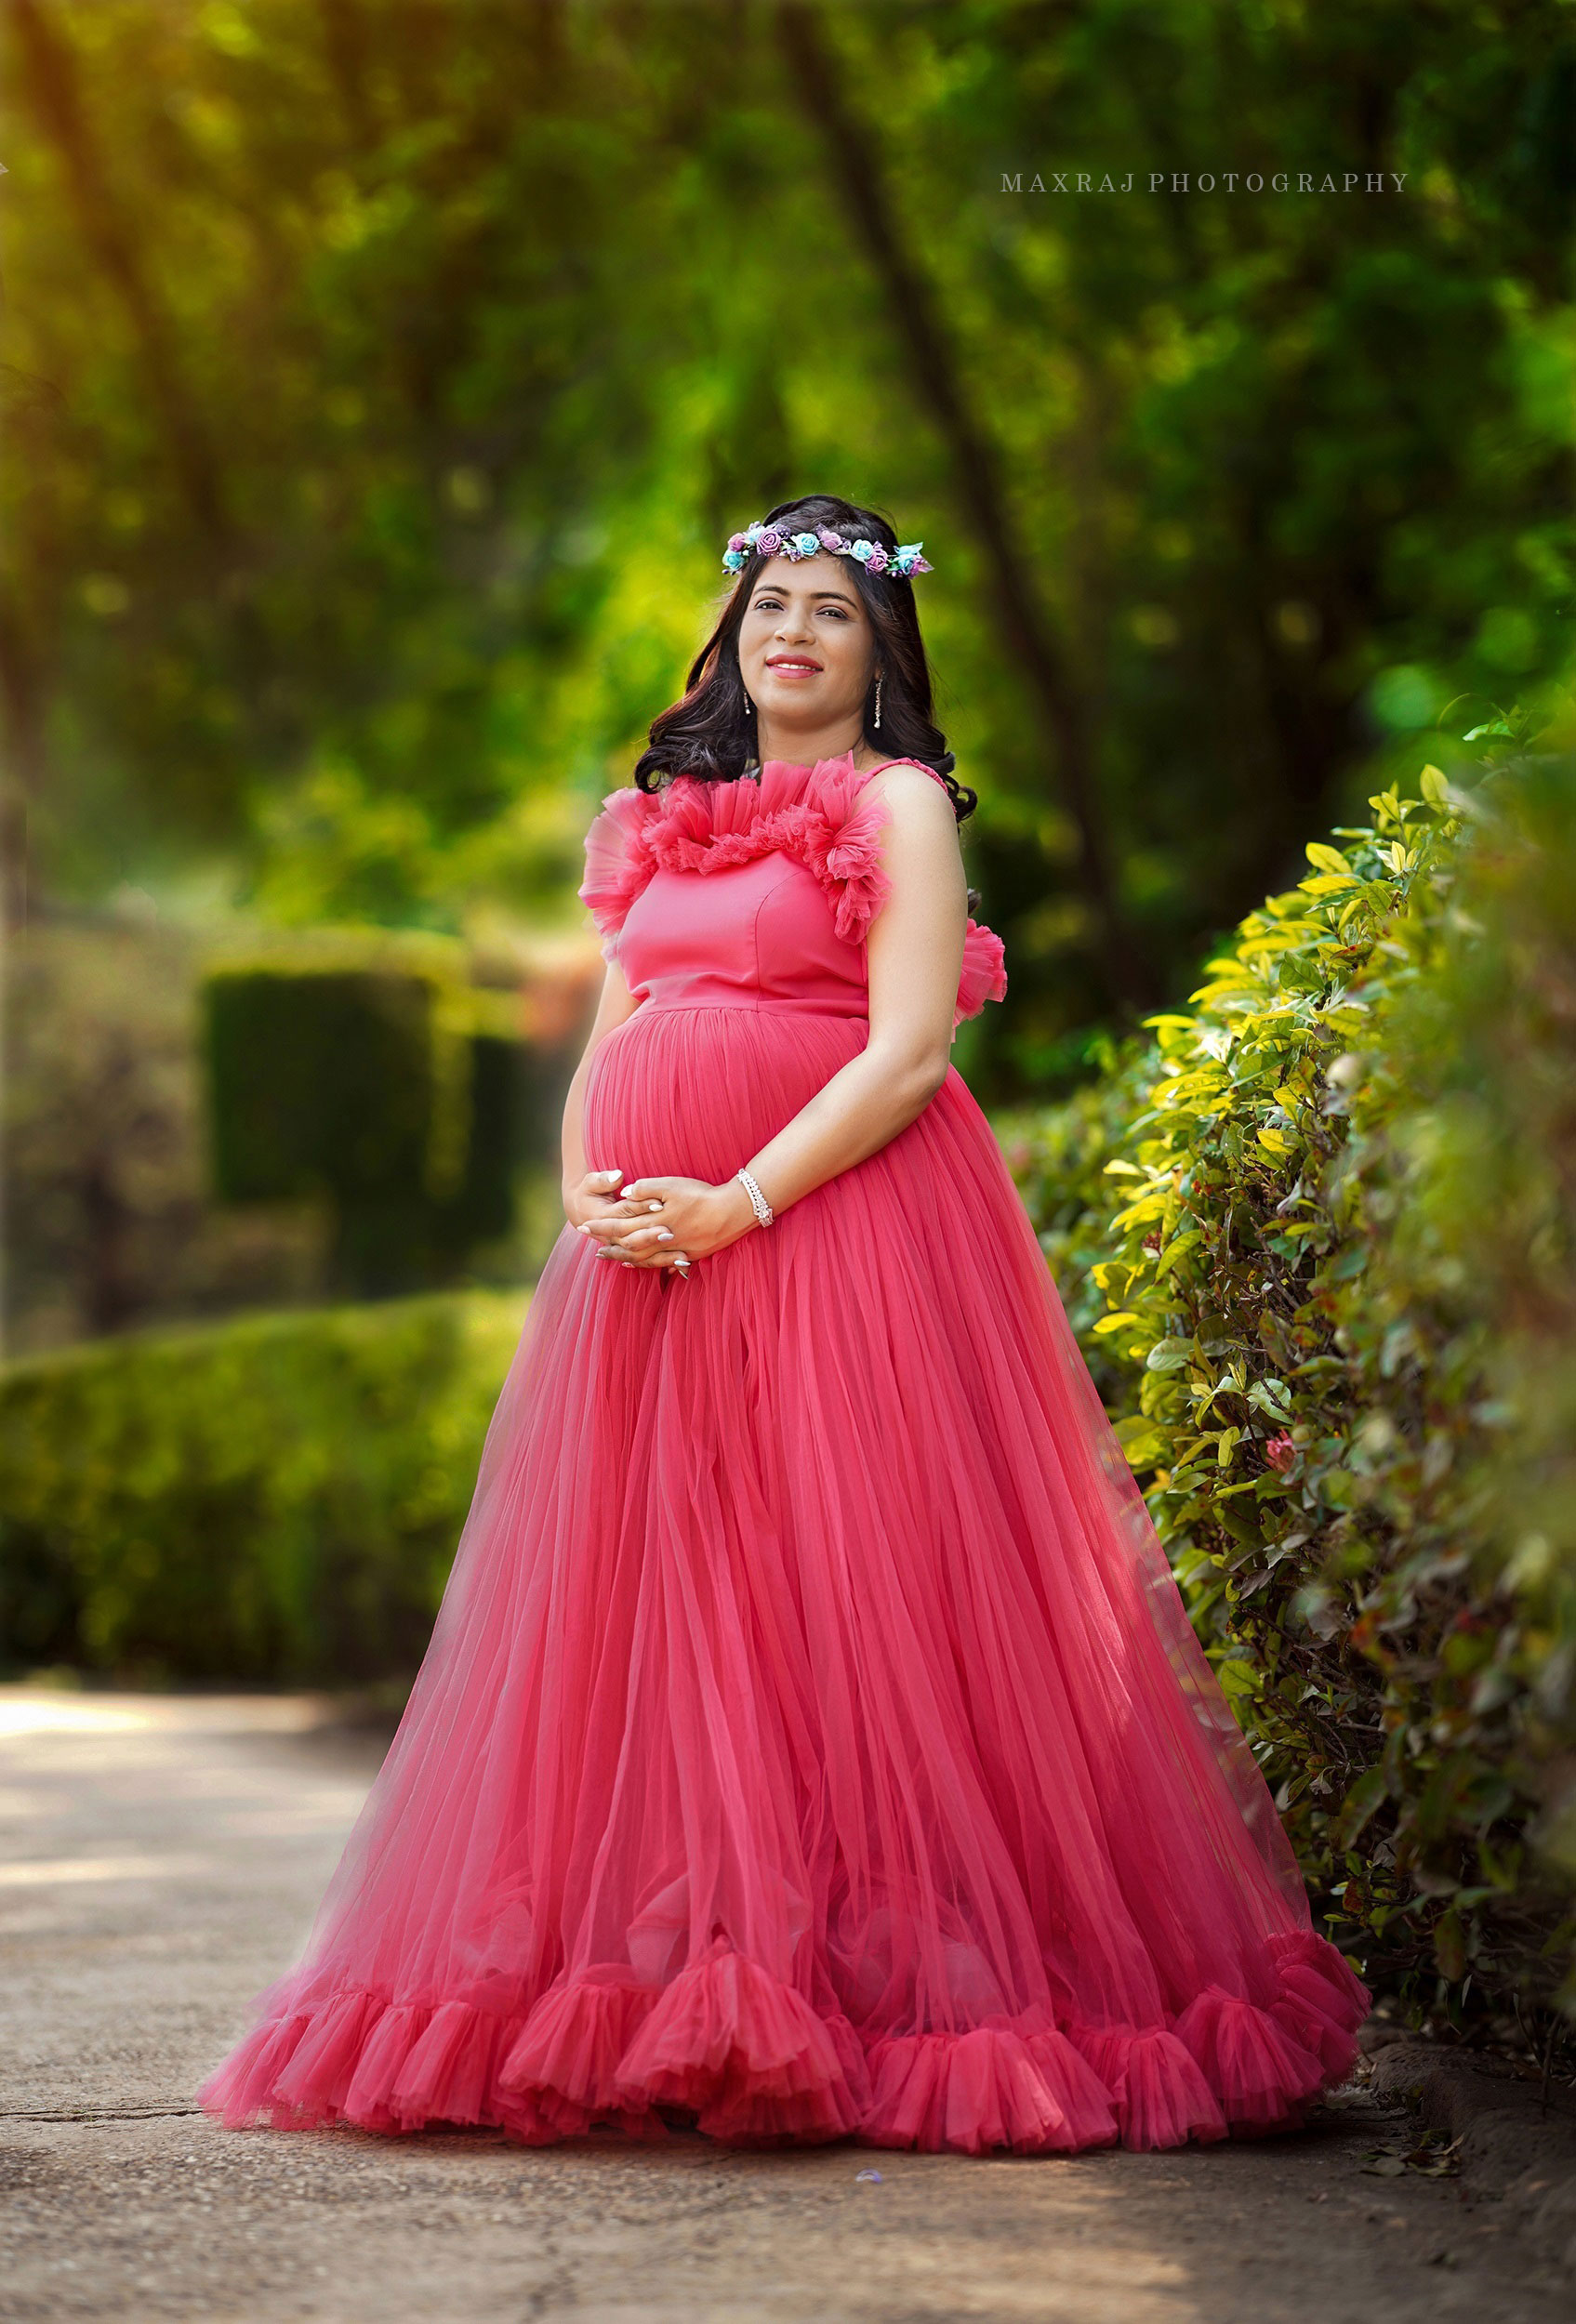 best maternity photographer in pune, best maternity photographer in india, maternity photoshoot in pune in pink dress